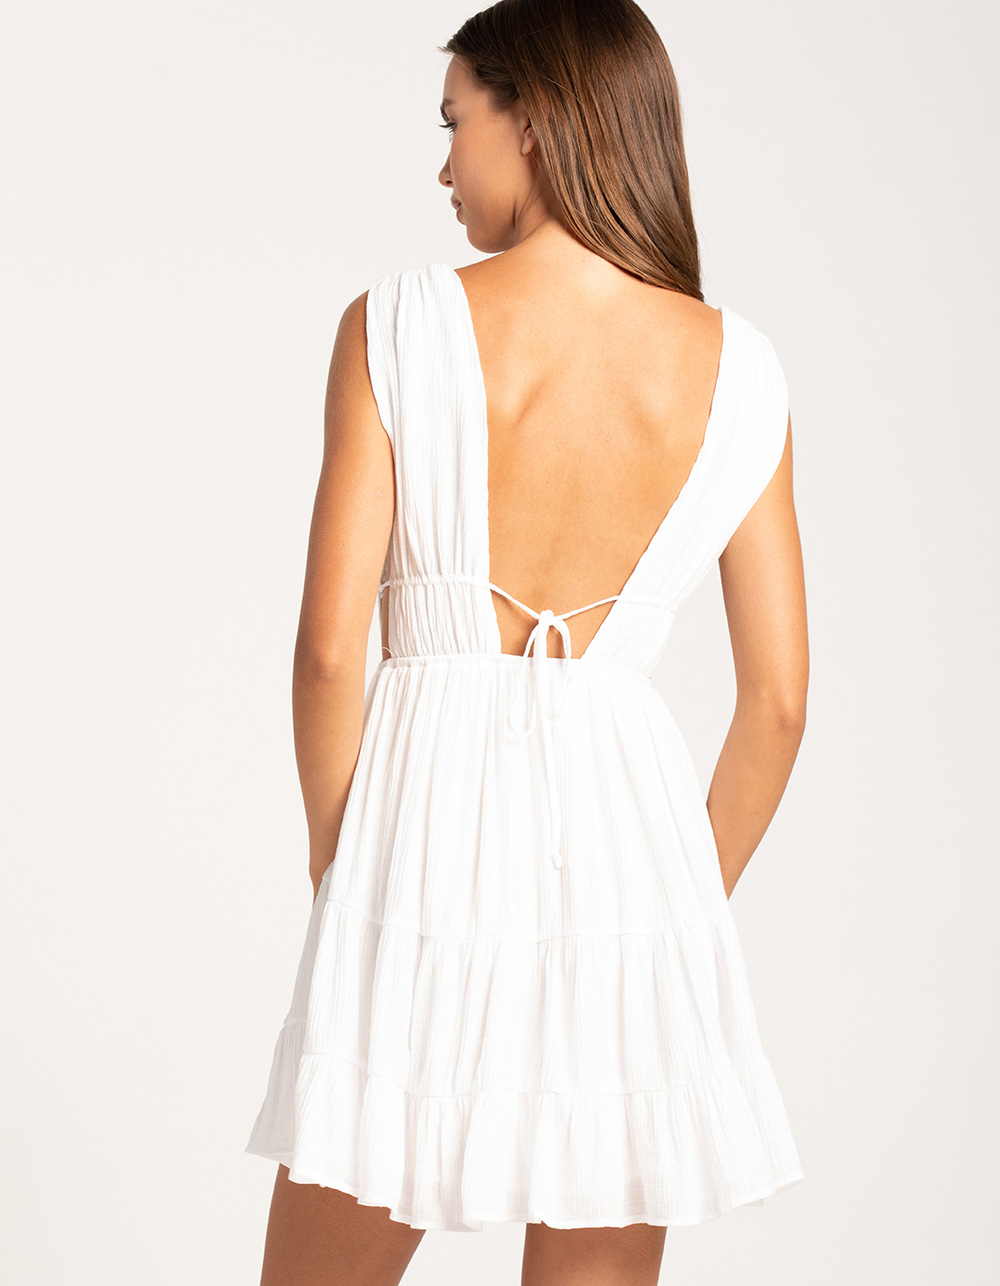 WHITE - Tiered Dress Womens | COTTON CANDY Tillys Short LA